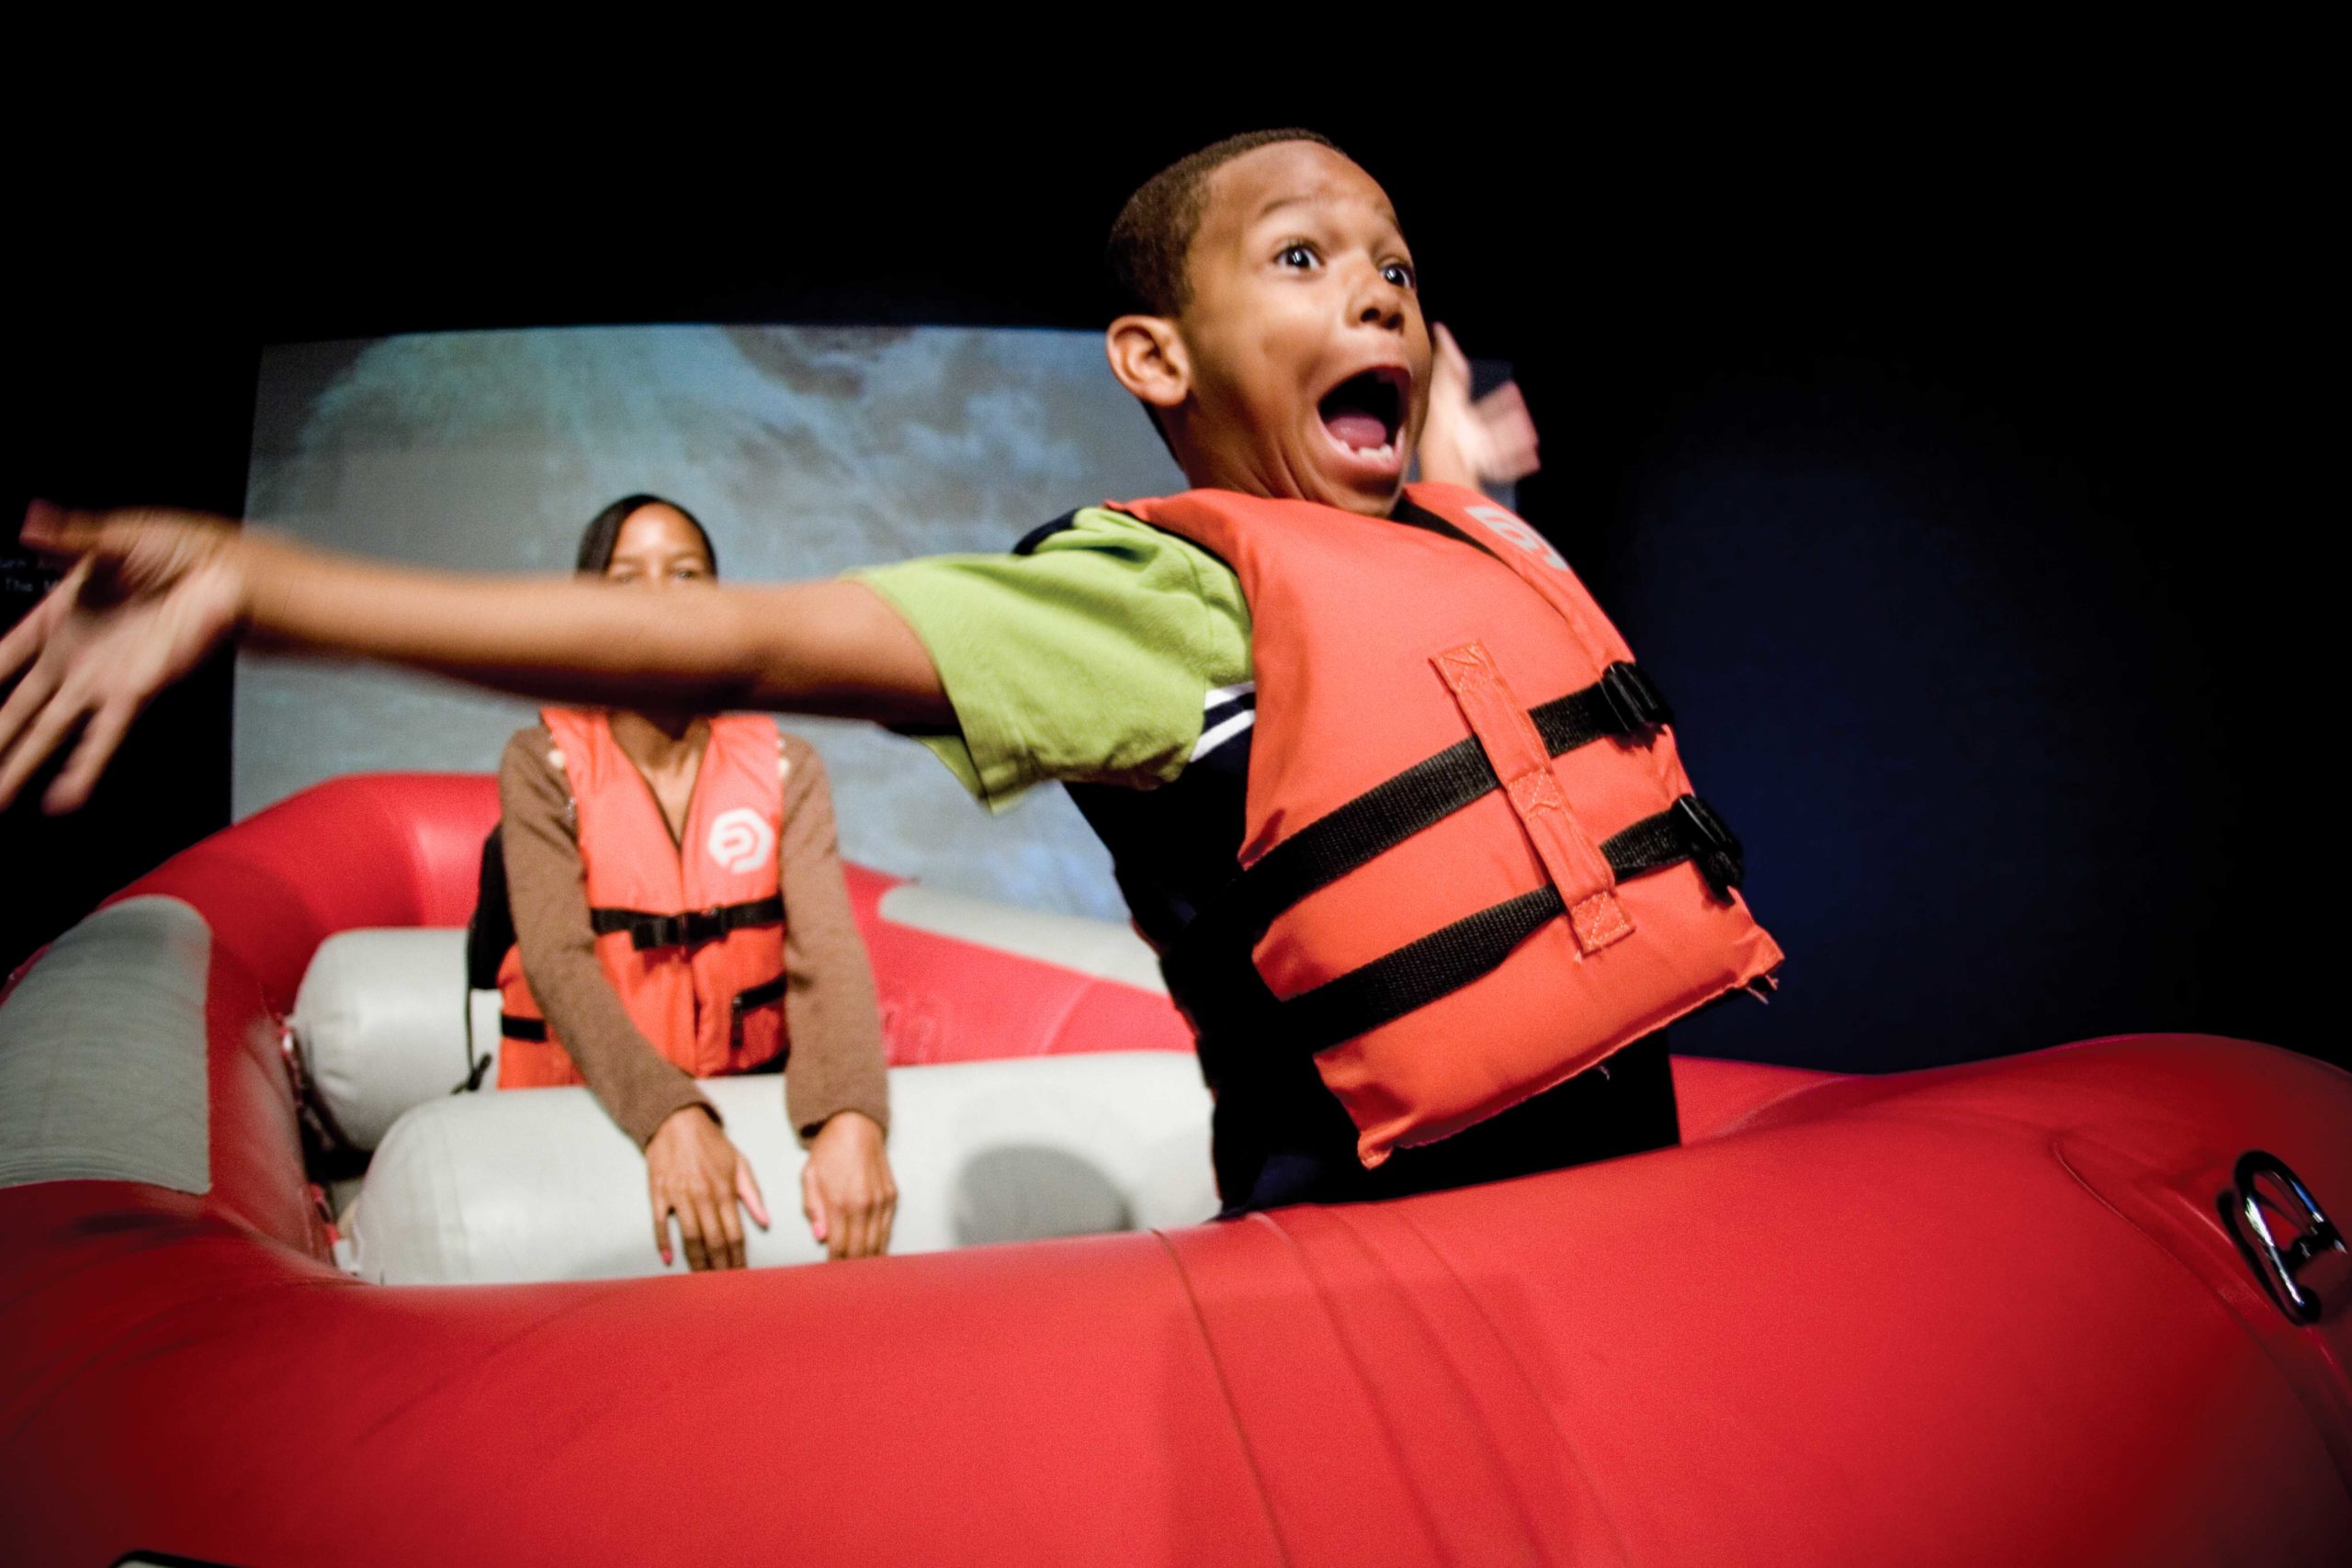 Excited young boy with life jacket on raft